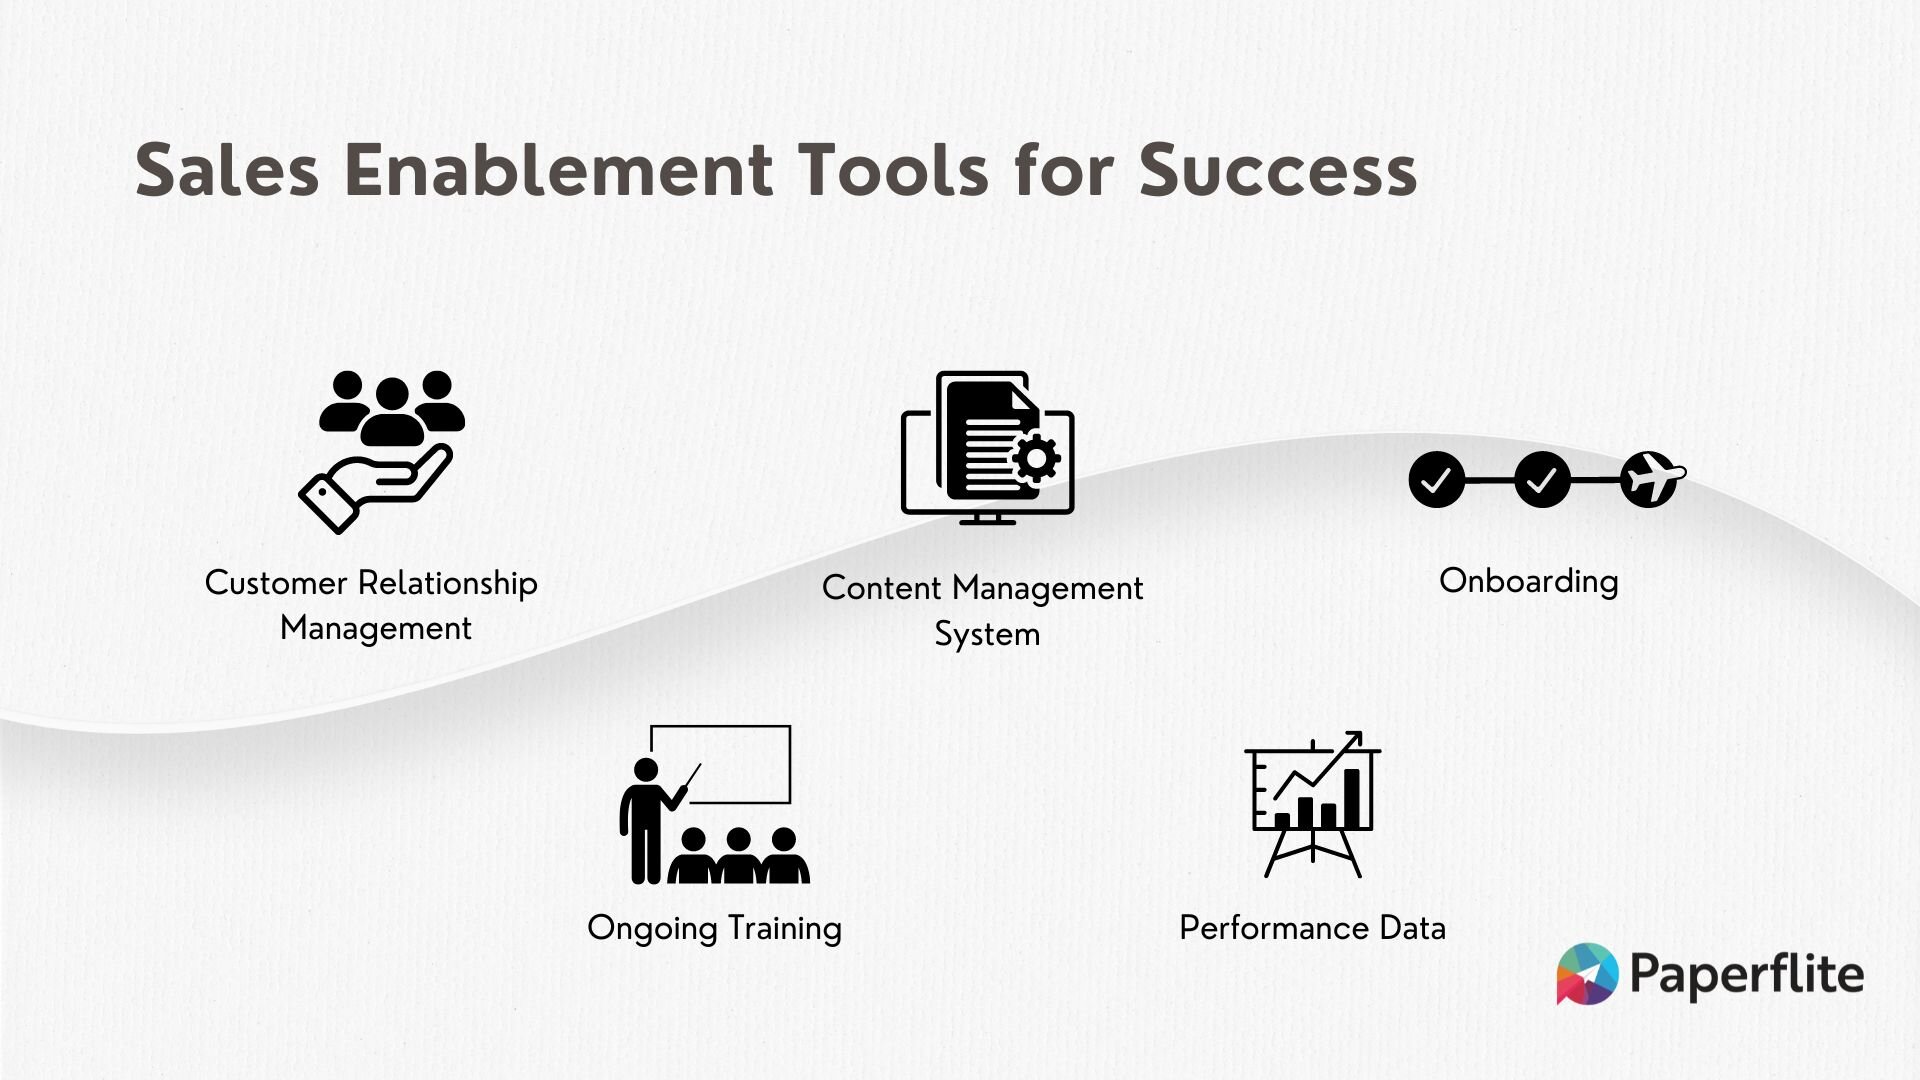 Creative of Sales Enablement Tools for Success by Paperflite